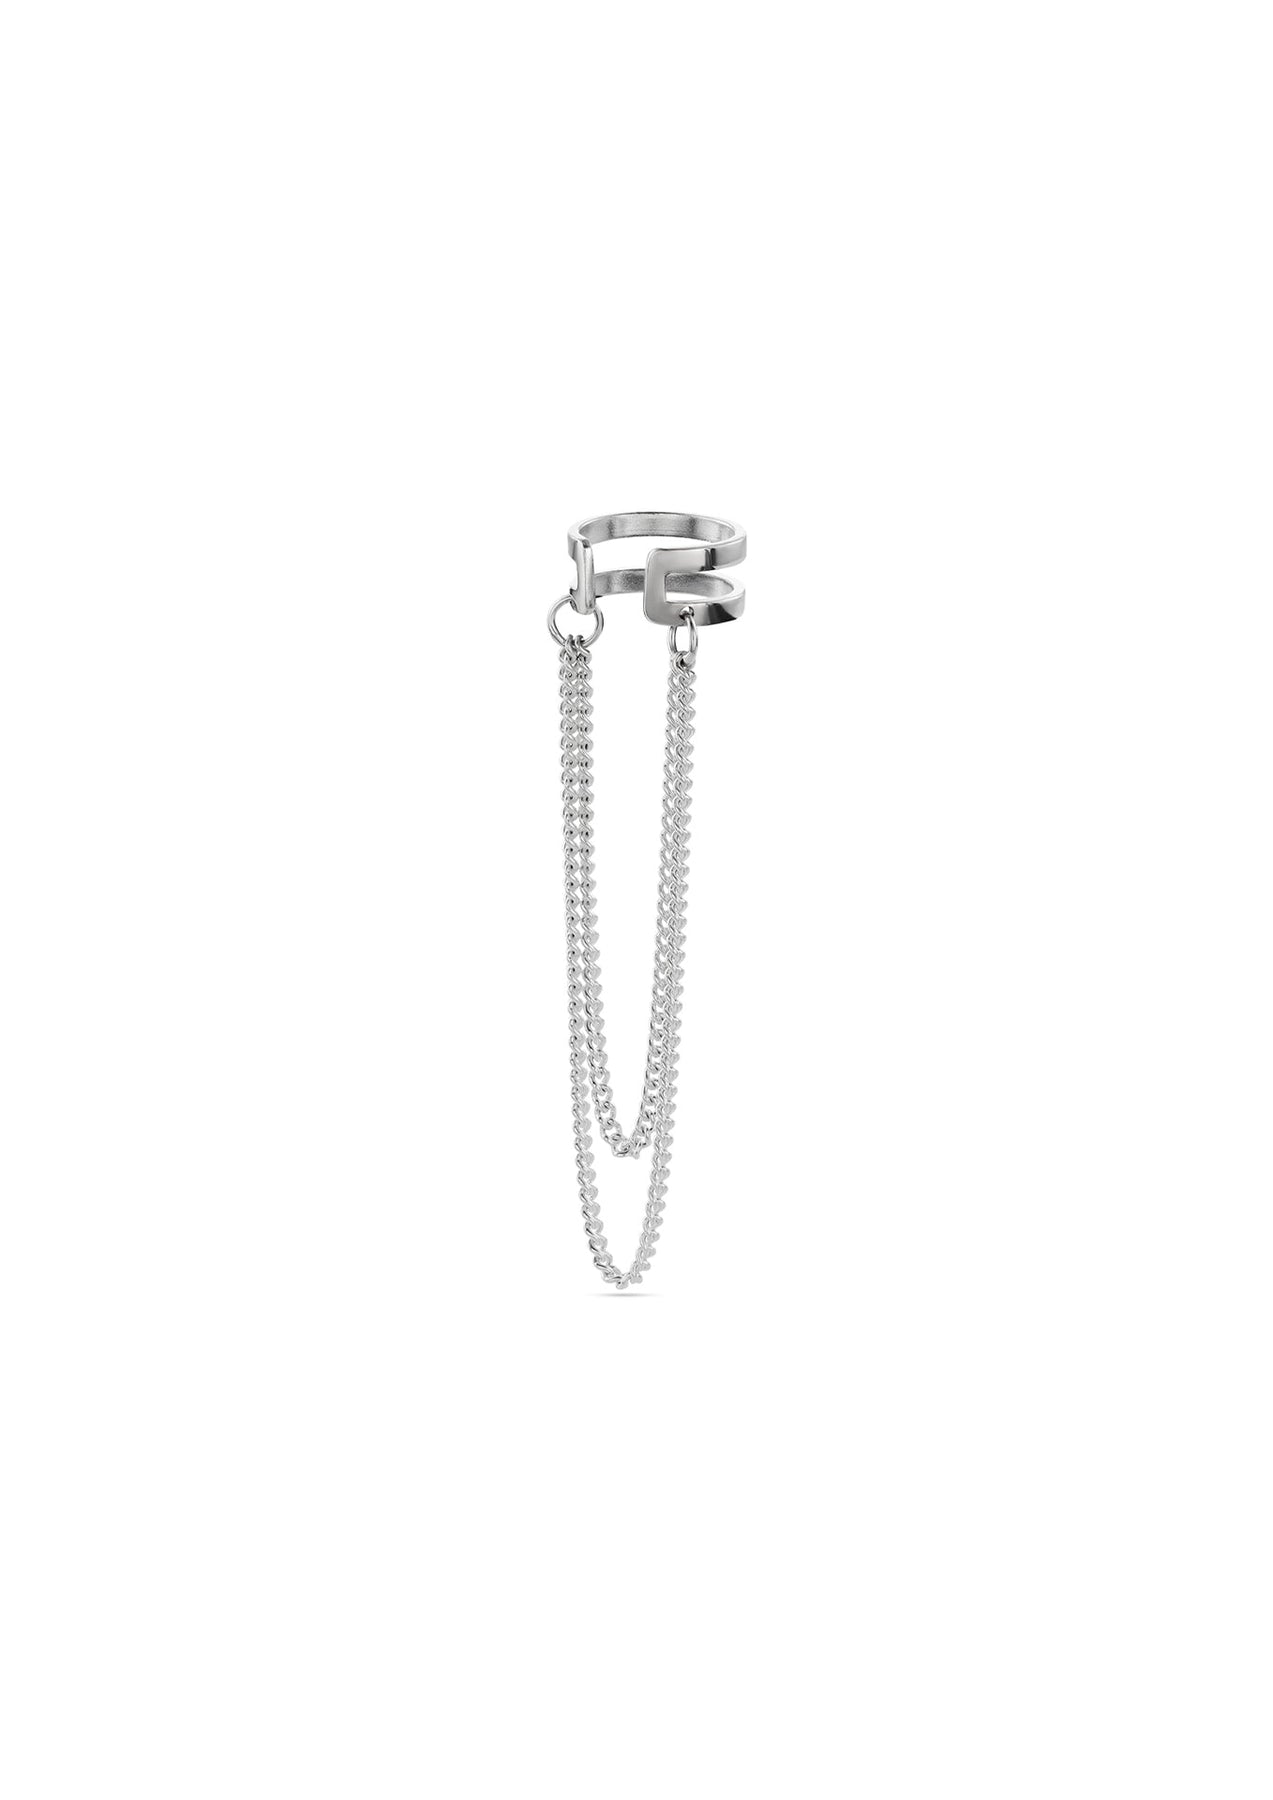 Sterling silver Revolve Ear Cuff with double split flat design and double chain detail. Handcrafted, no piercing needed. 1mm thick, 5.73mm wide, 60mm long, 2.67g weight. Sustainable packaging. Made in Lithuania and the Netherlands. 2-year warranty.